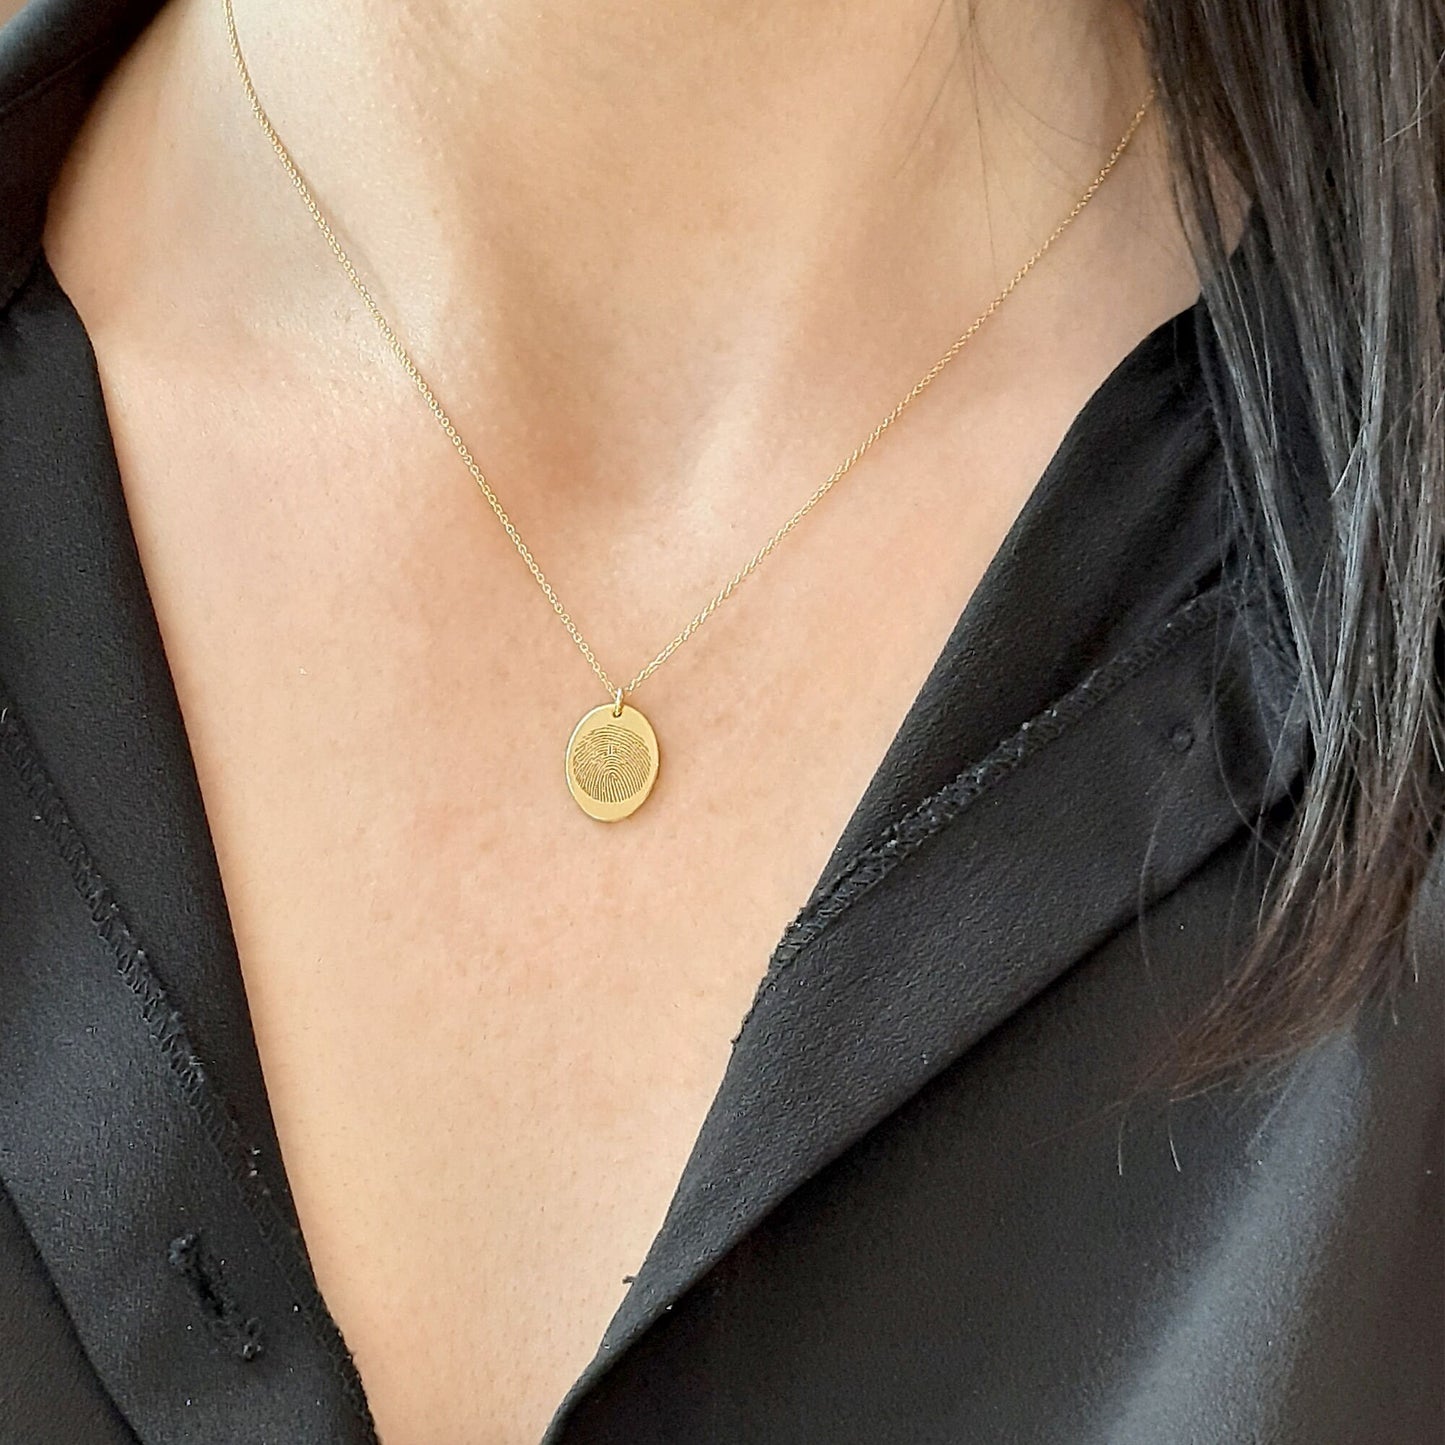 14k Yellow gold Fingerprint Necklace - Unique gold Sympathy Gift - Delicate Personalized Fingerprint Necklace For Her - layered necklace